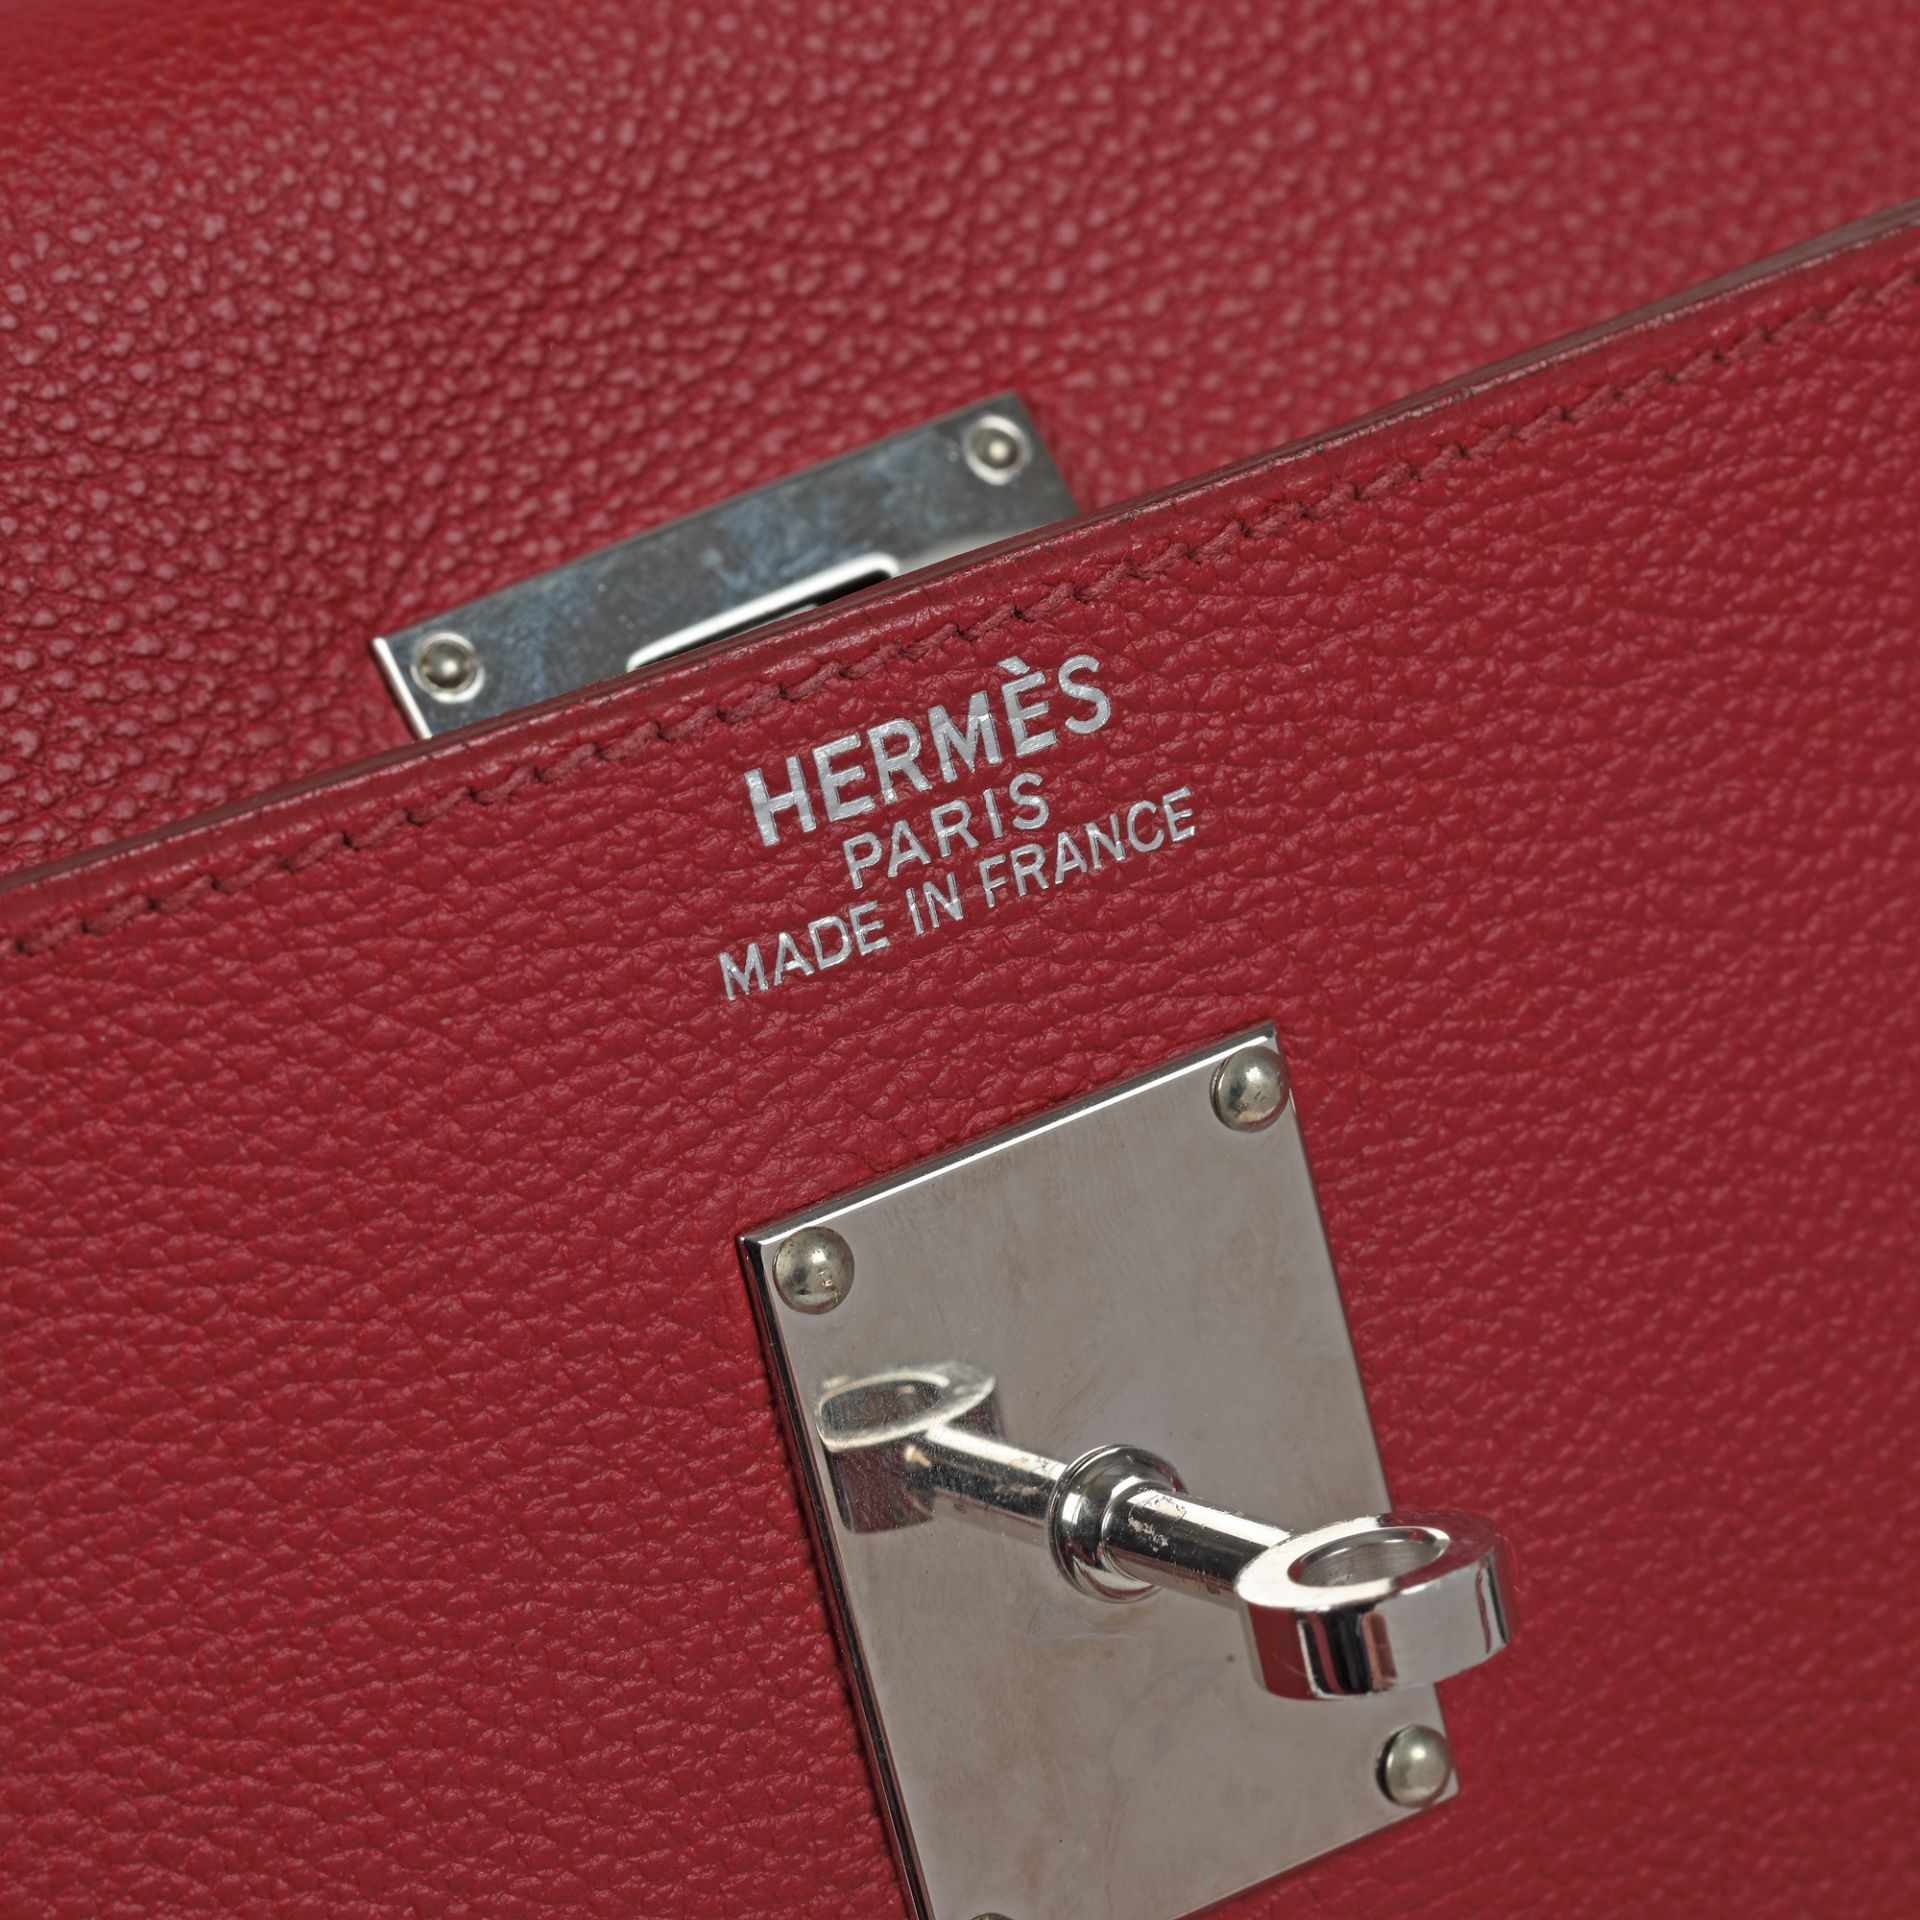 "Kelly Voyage" - Hermès travel bag, Clemence leather, Rouge Garance colour, limited edition - Image 2 of 4